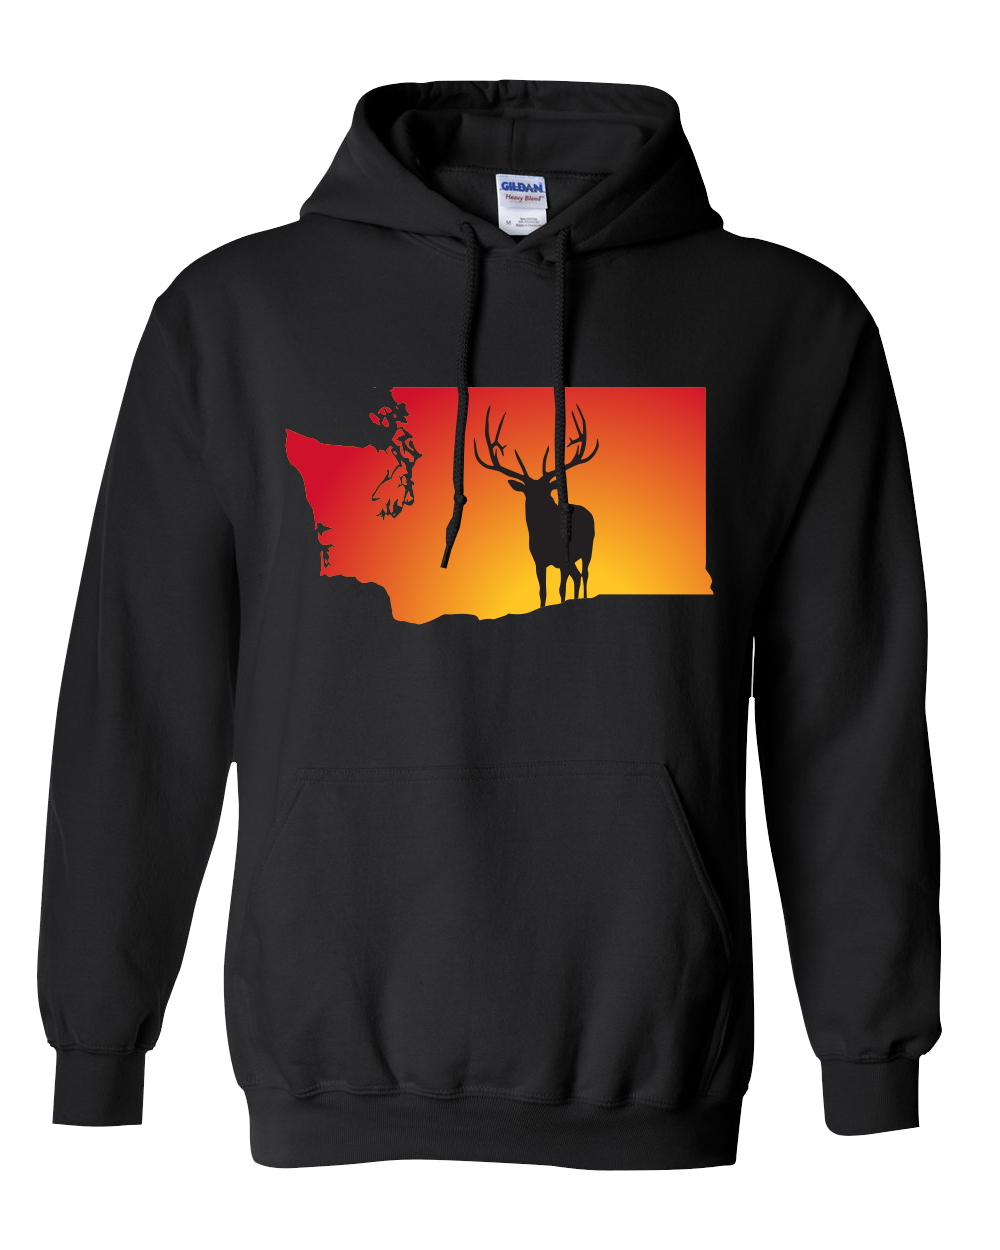 Pullover Hooded Sweatshirt Washington Black Elk Vibrant Design High Quality Tight Knit Ring Spun Low Maintenance Cotton Printed With The Newest Available Color Transfer Technology